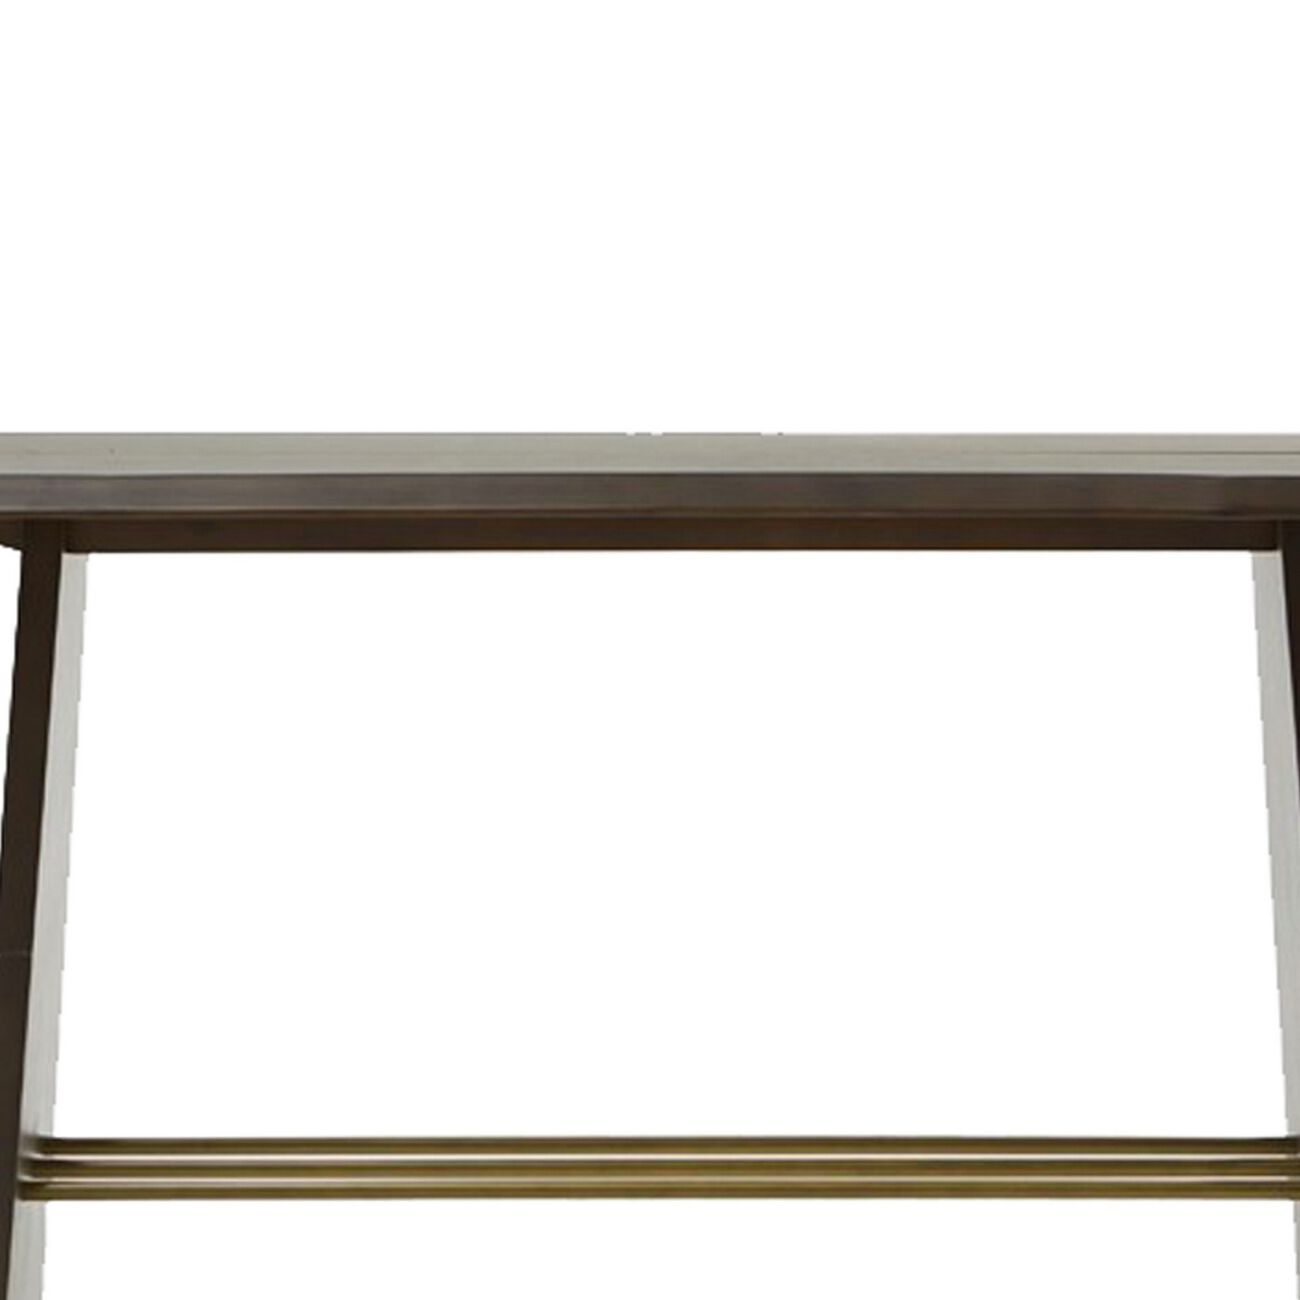 Rectangular Wooden Console Table with Slated Bar Inlay, Brown